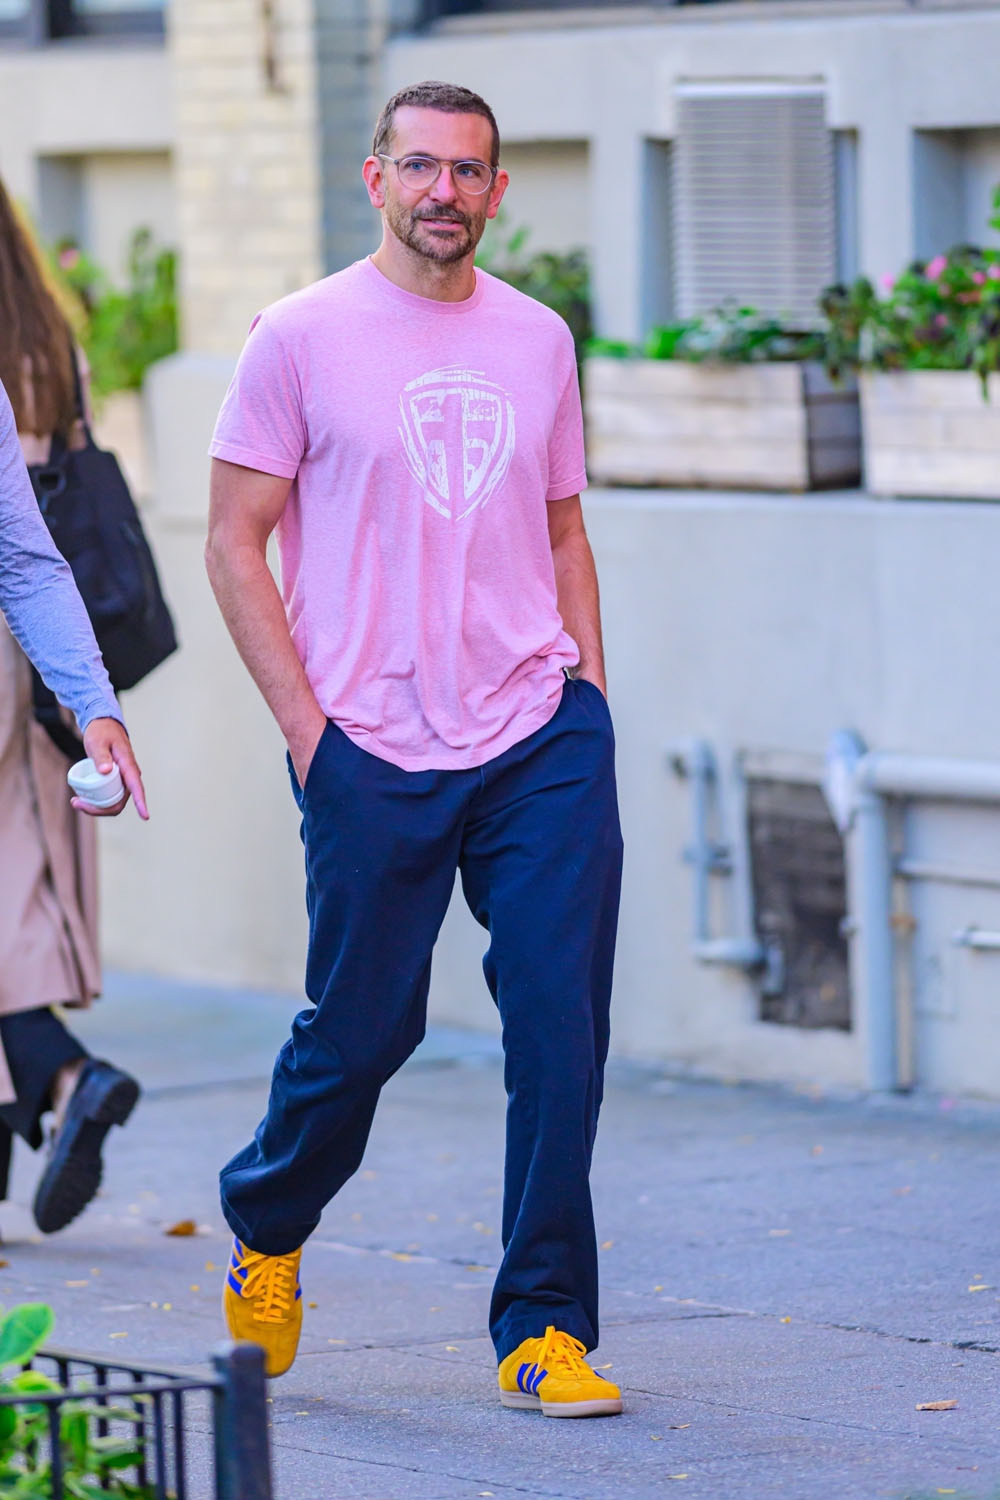 Gigi Hadid and Bradley Cooper seen wearing the same Guest in Residence x  Adidas shoes on separate occasions, seemingly confirming their relationship